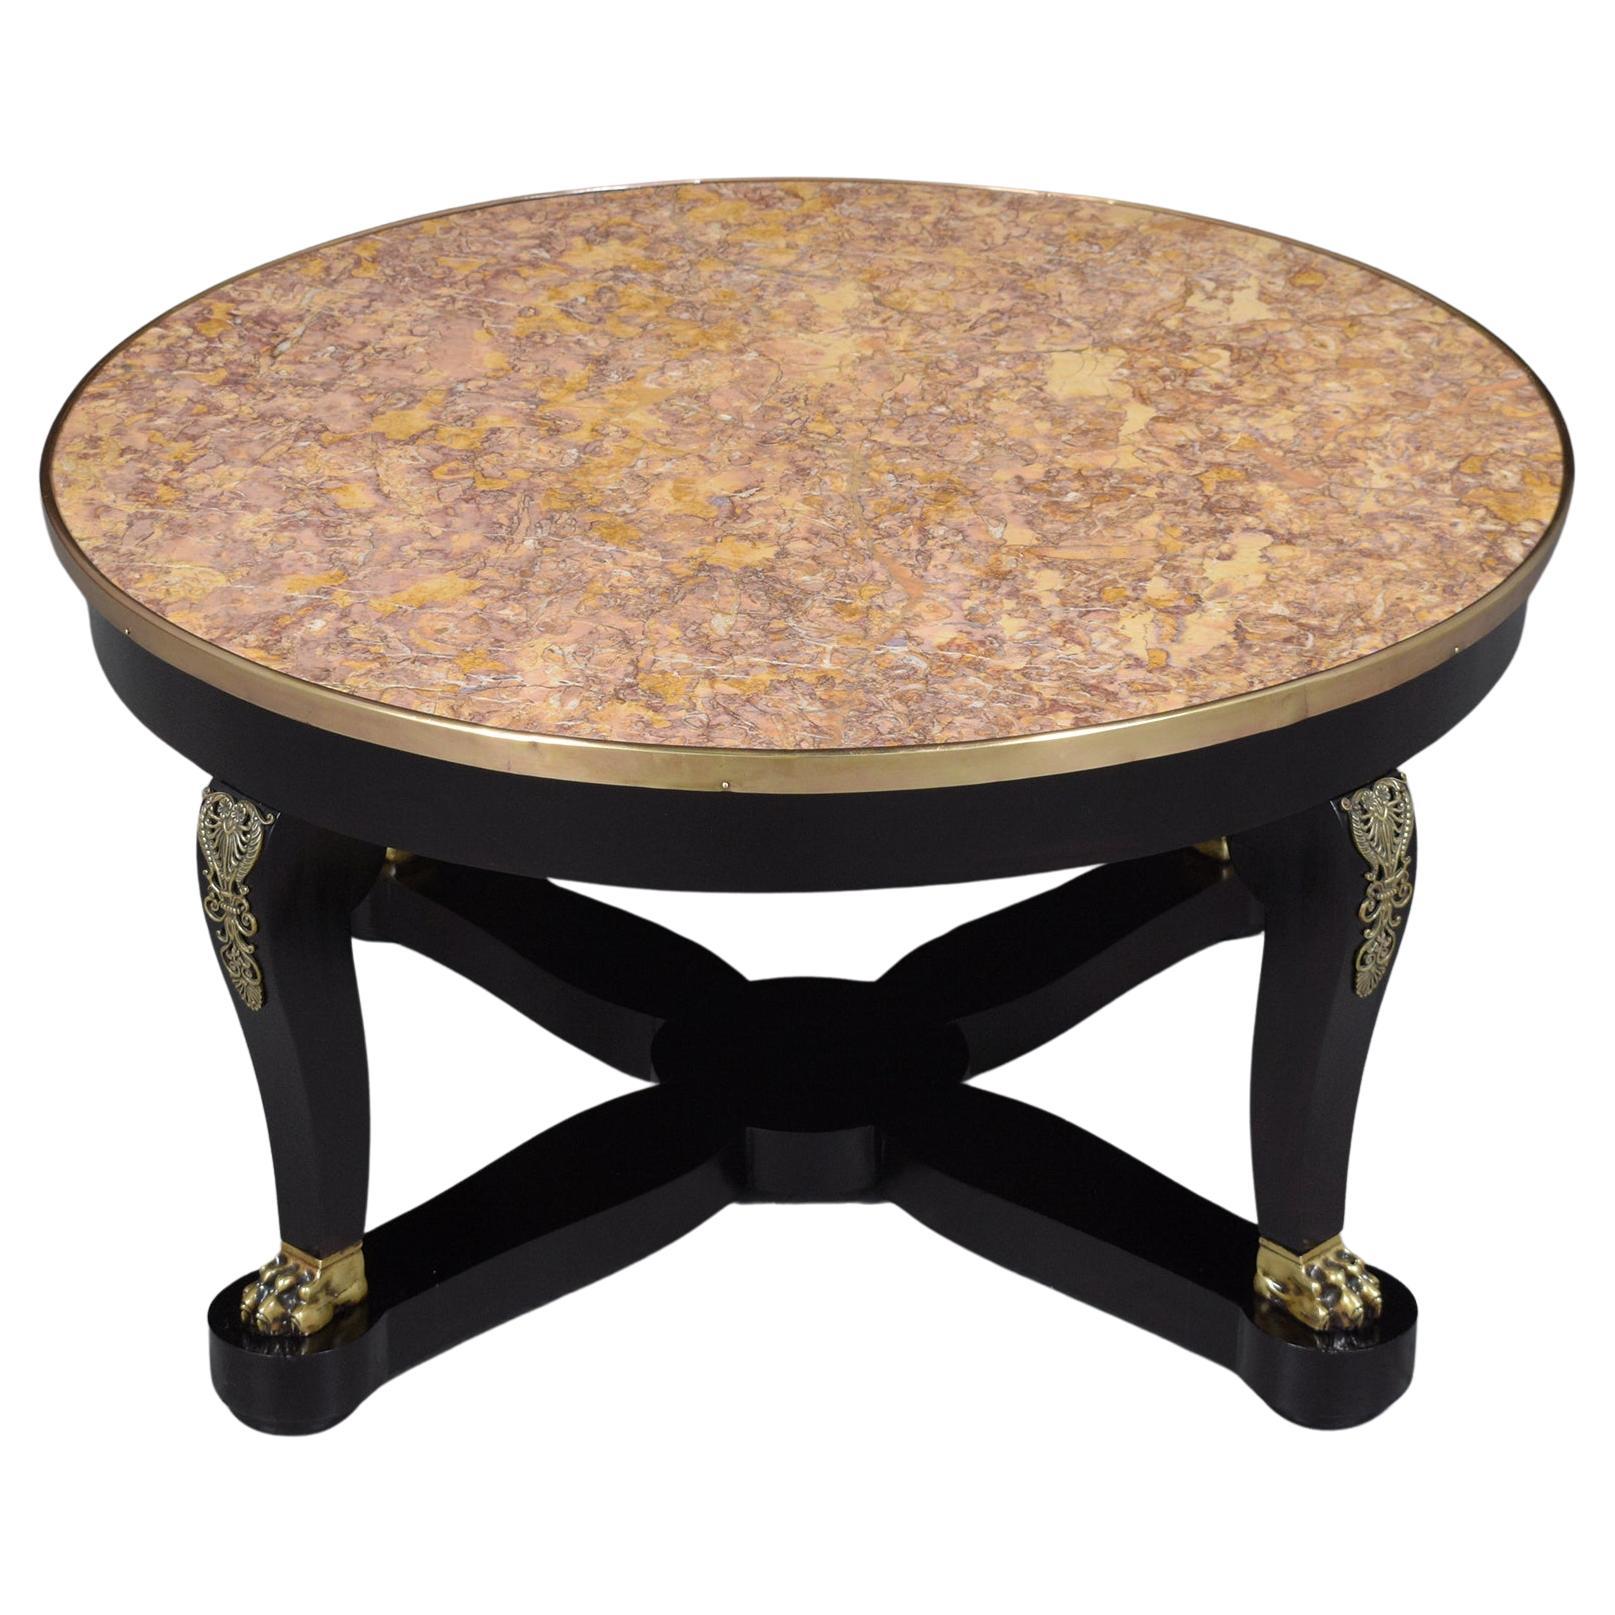 1880s Empire-Style Antique Coffee Table: Historical Elegance Restored